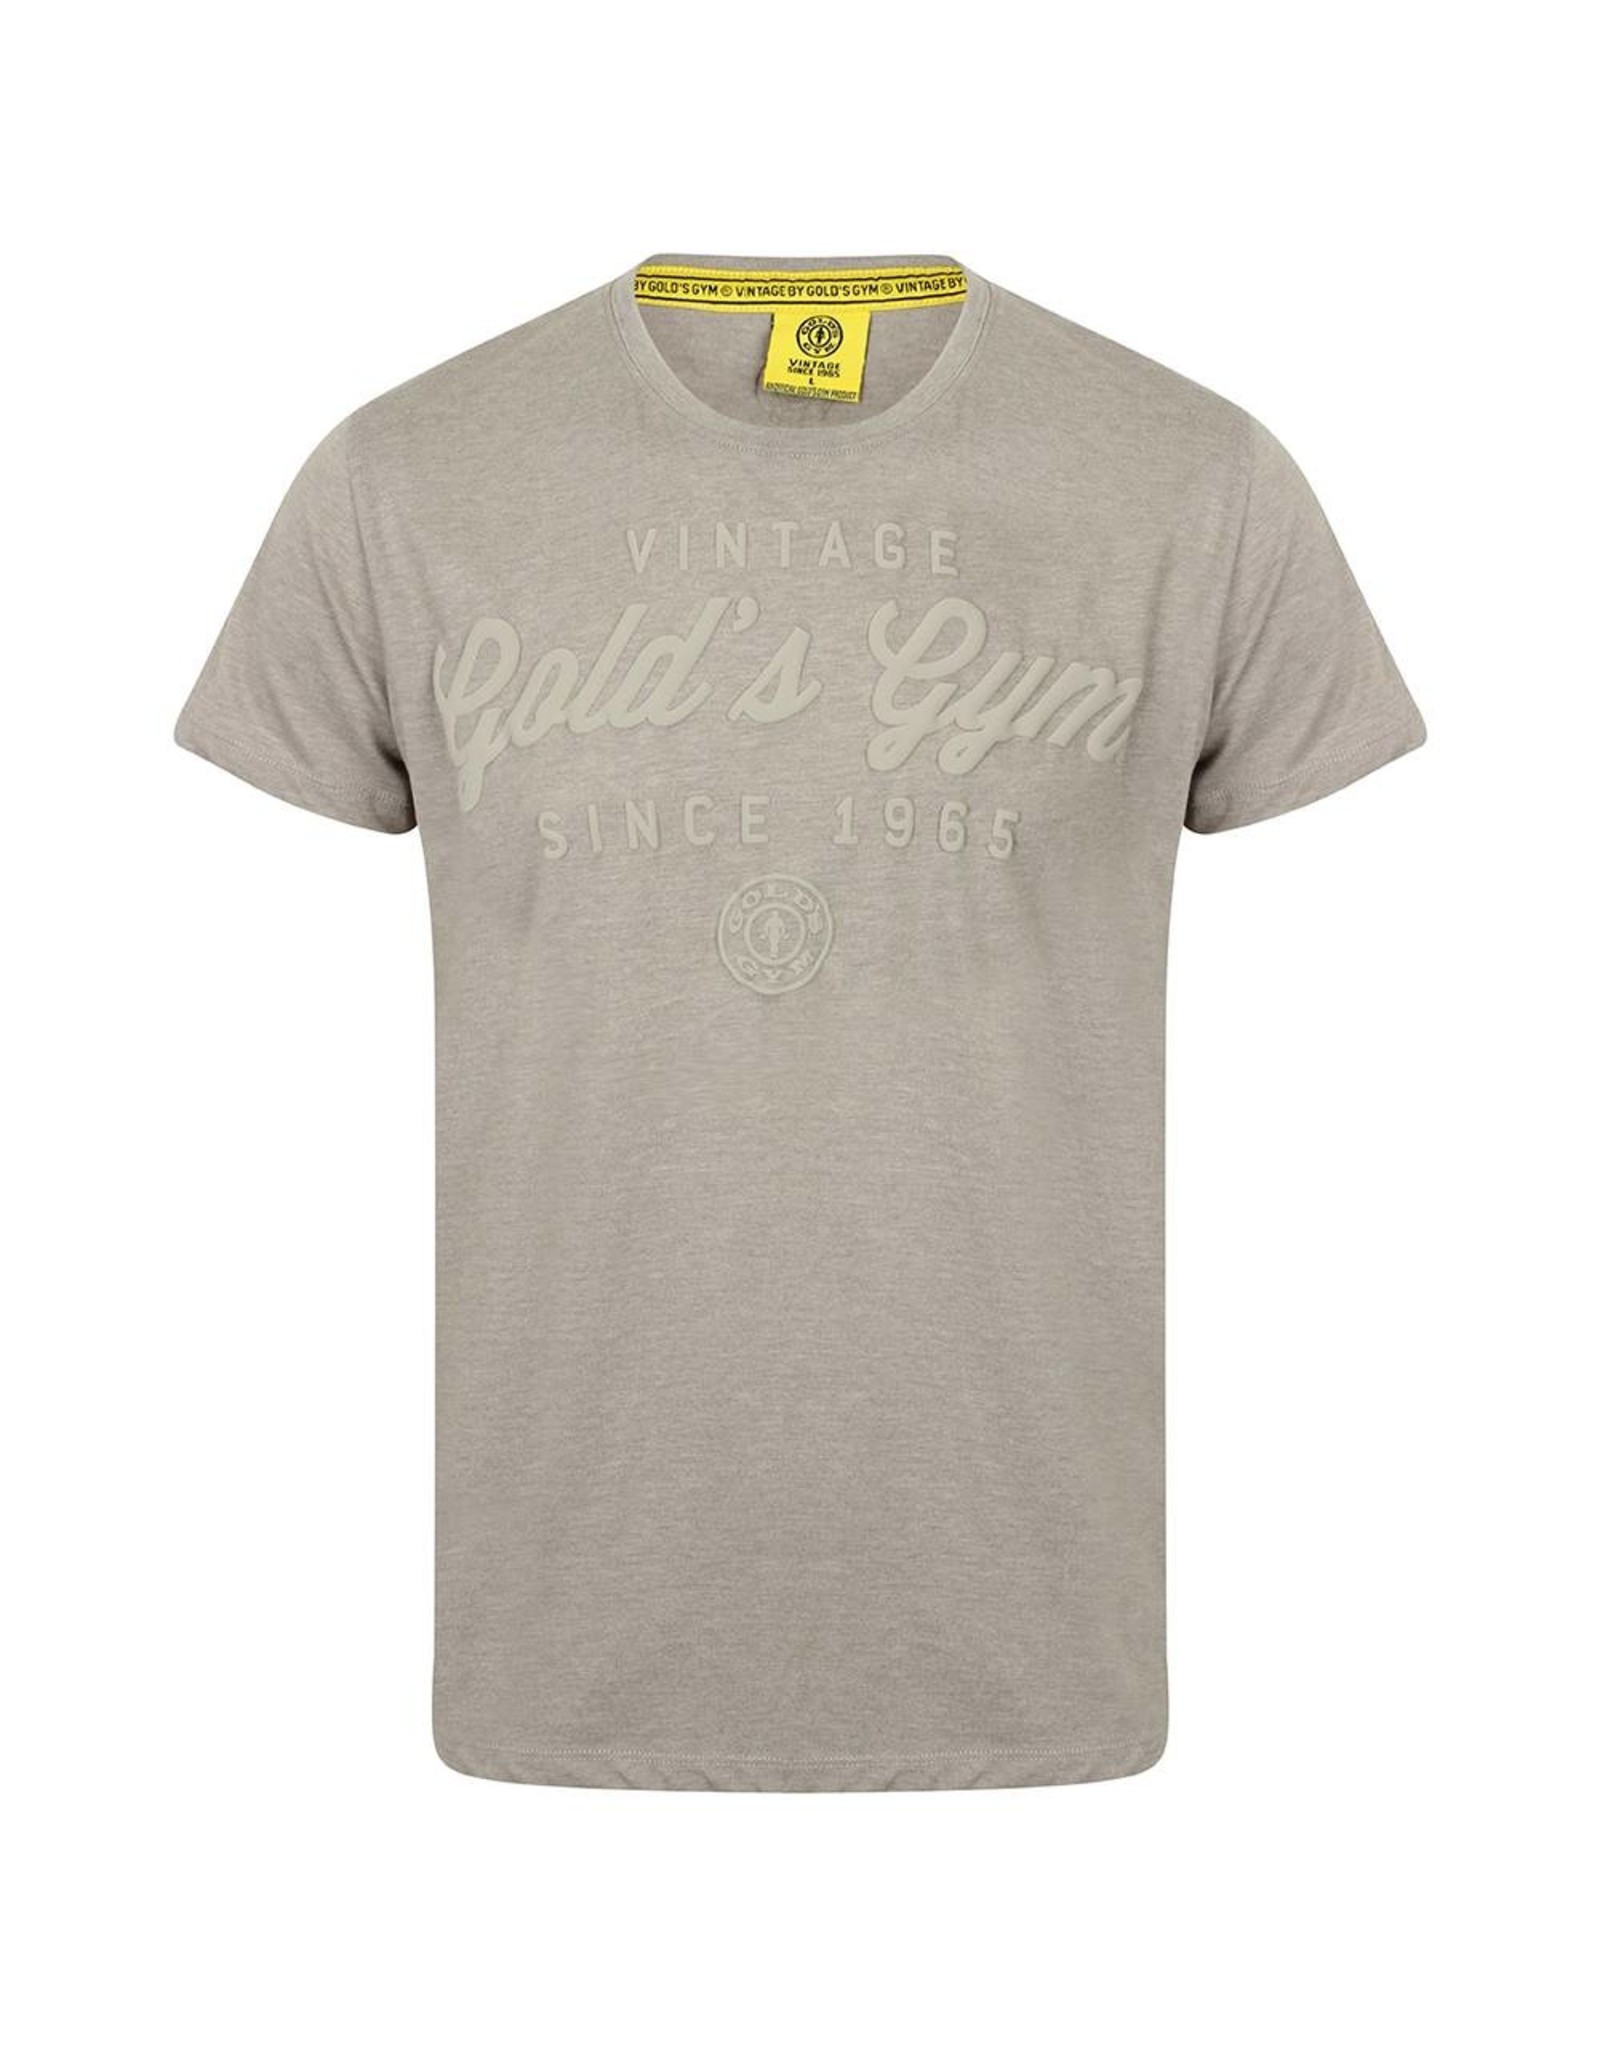 Gold's Gym Embossed Vintage Style T-shirt - Grey Marl